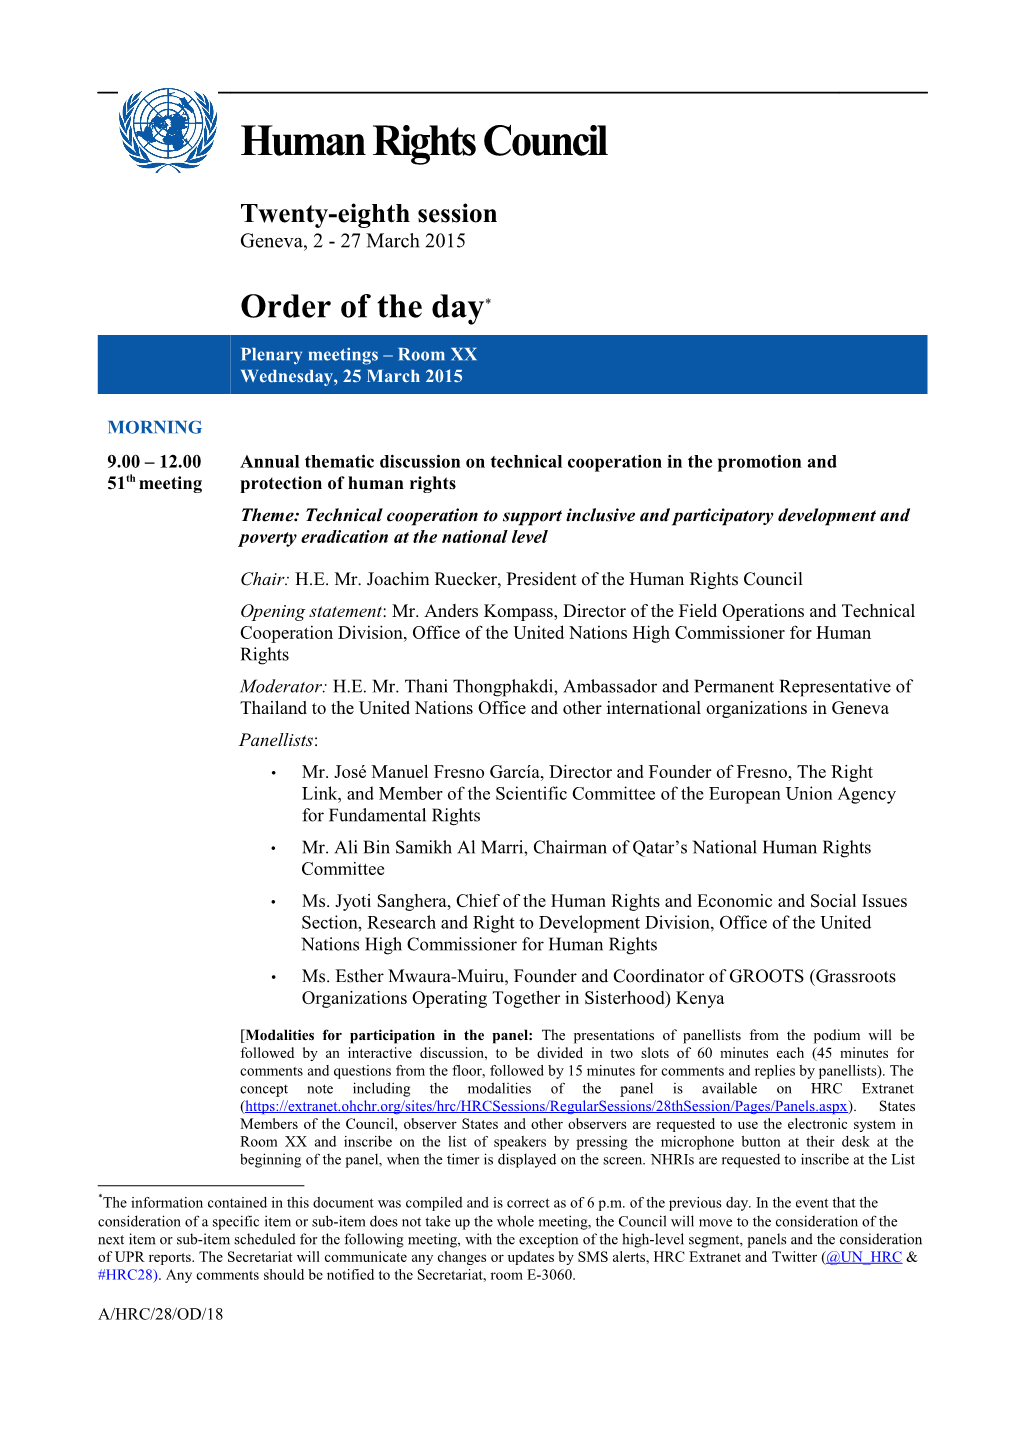 Order of the Day, Wednesday 25 March 2015